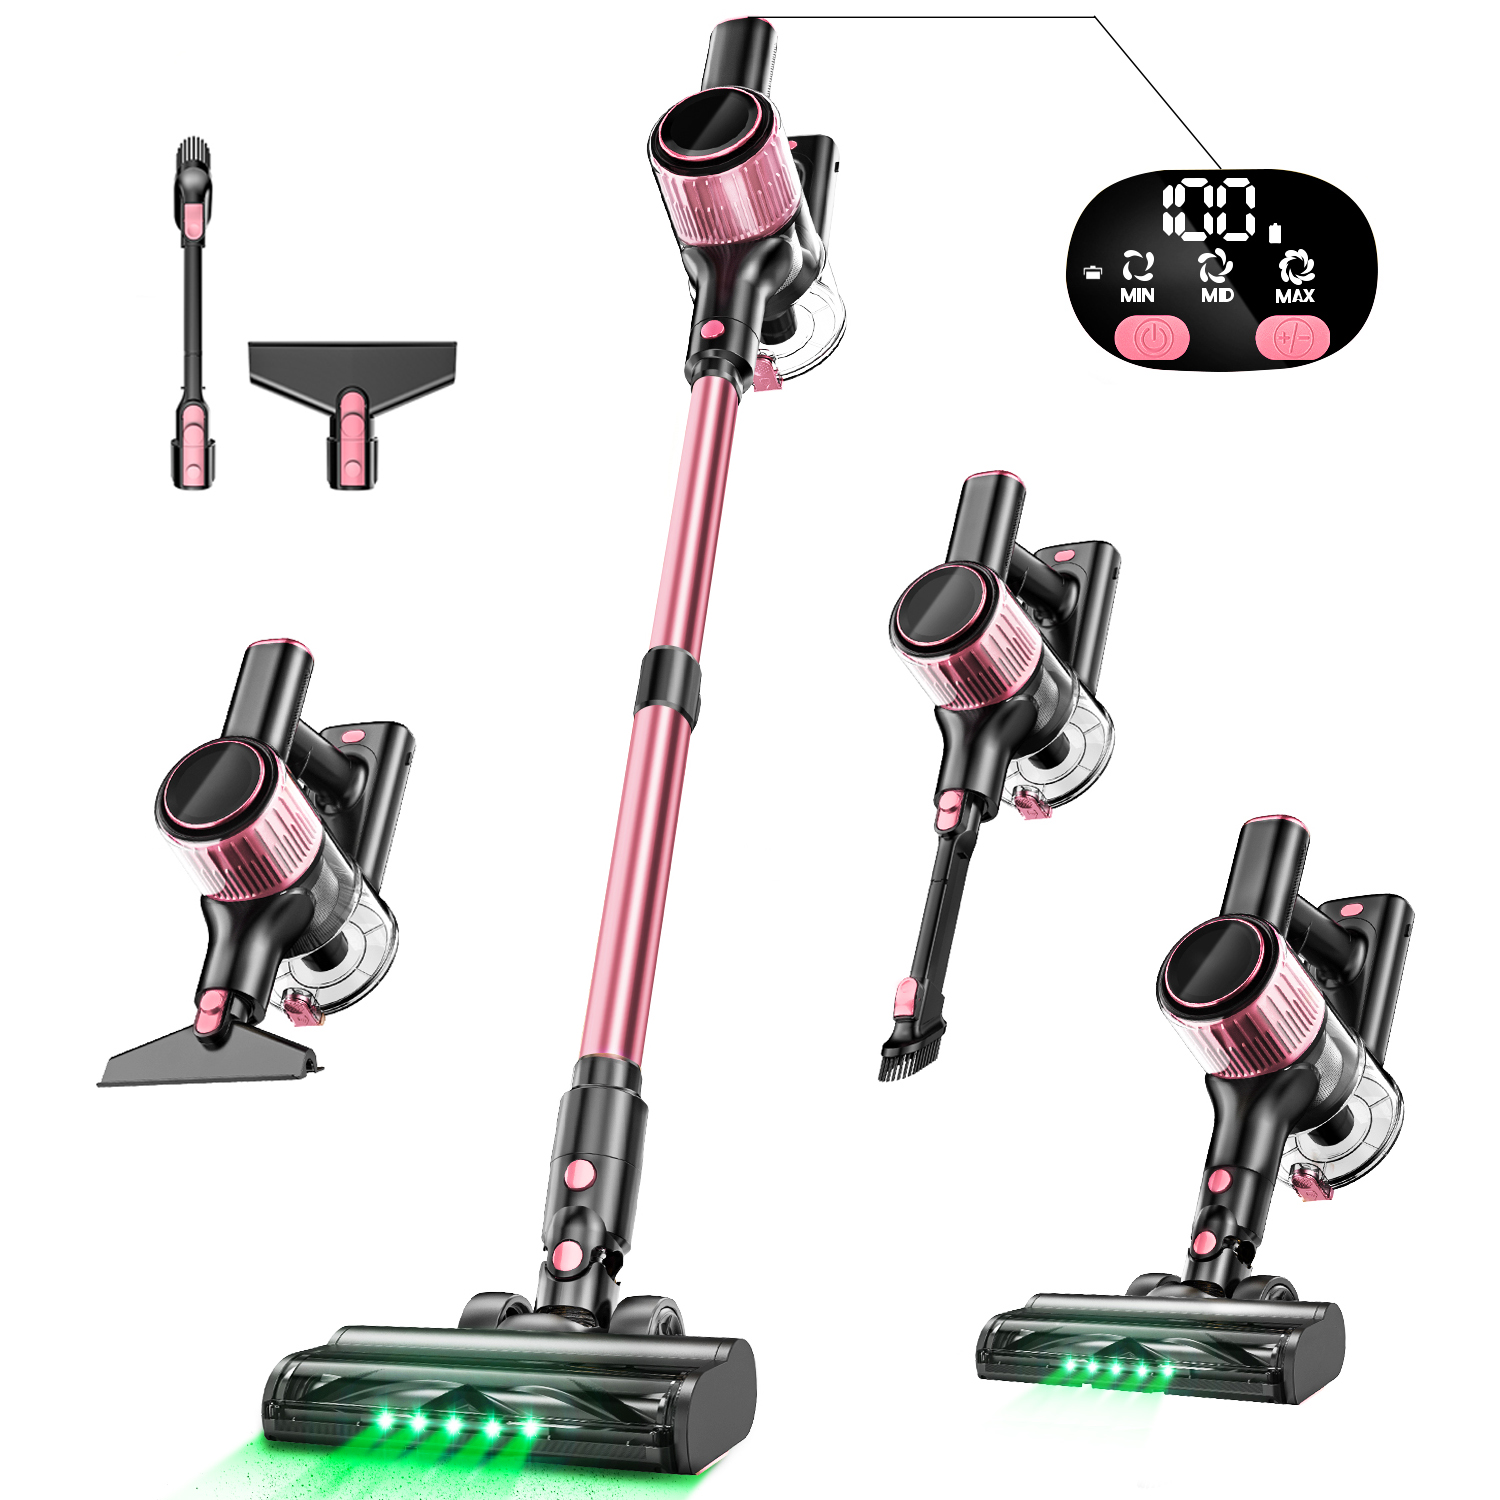 

Cordless Vacuum Cleaner, 30kpa Powerful Suction 8 In 1 Stick Vacuum With Led Display, 3 Modes Suction, Anti-tangle & Dust Cup, Lightweight Vacuum For Hardwood Floor/carpet/pet Hair, Pink